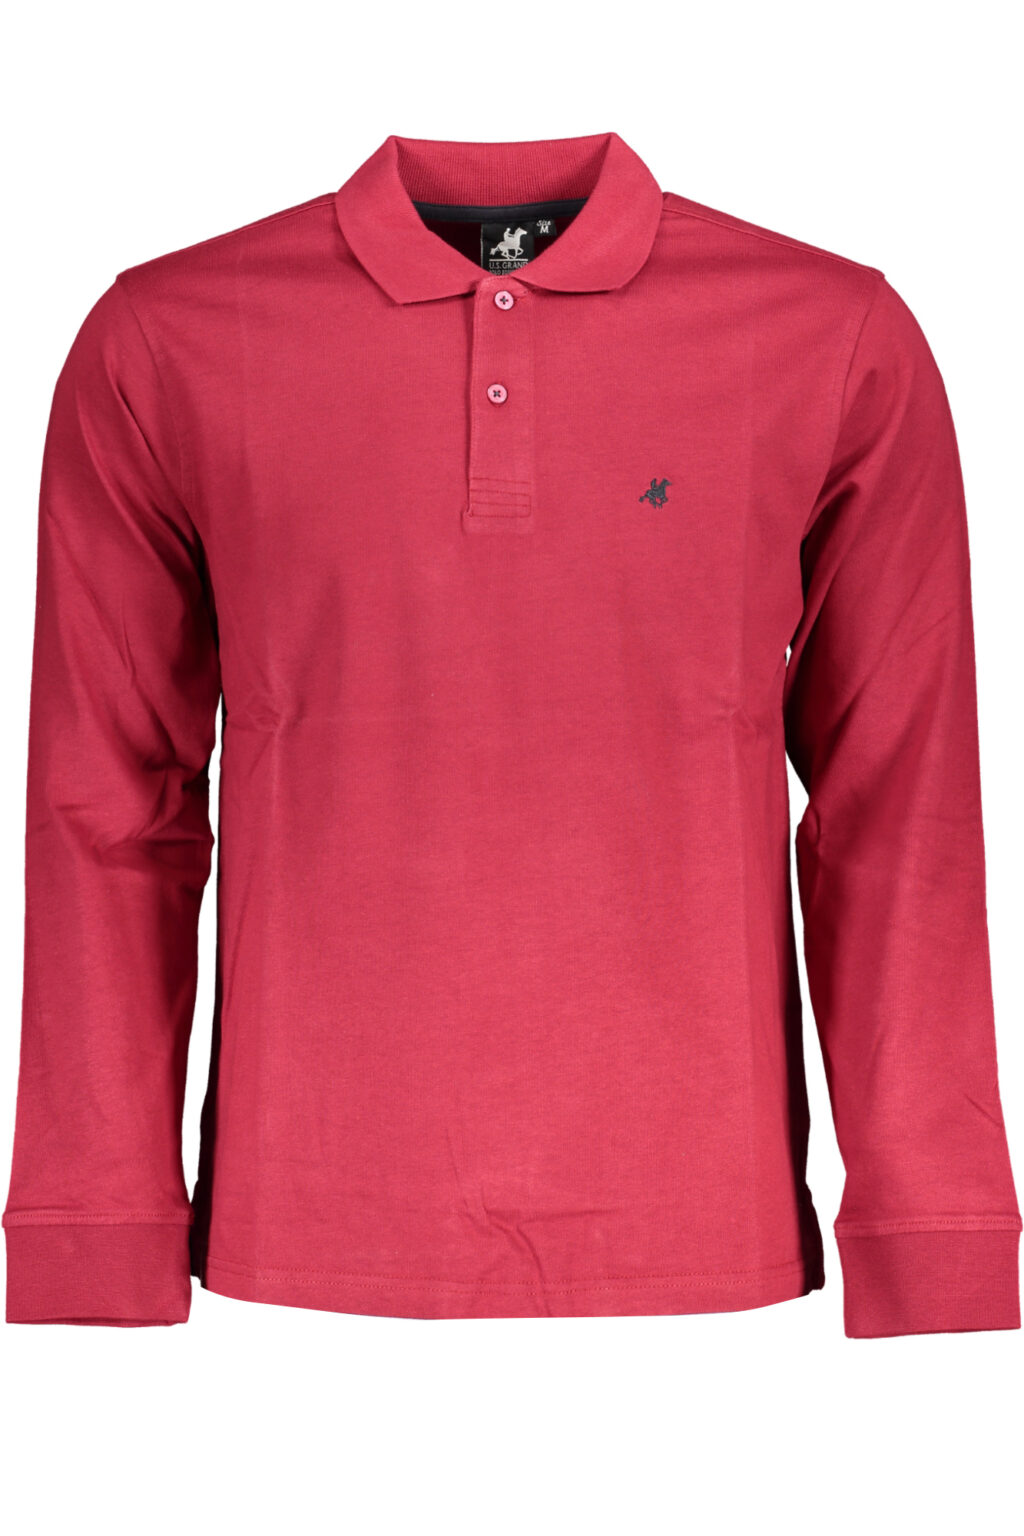 US GRAND POLO MEN'S LONG SLEEVED POLO SHIRT RED USP164_ROROSSO